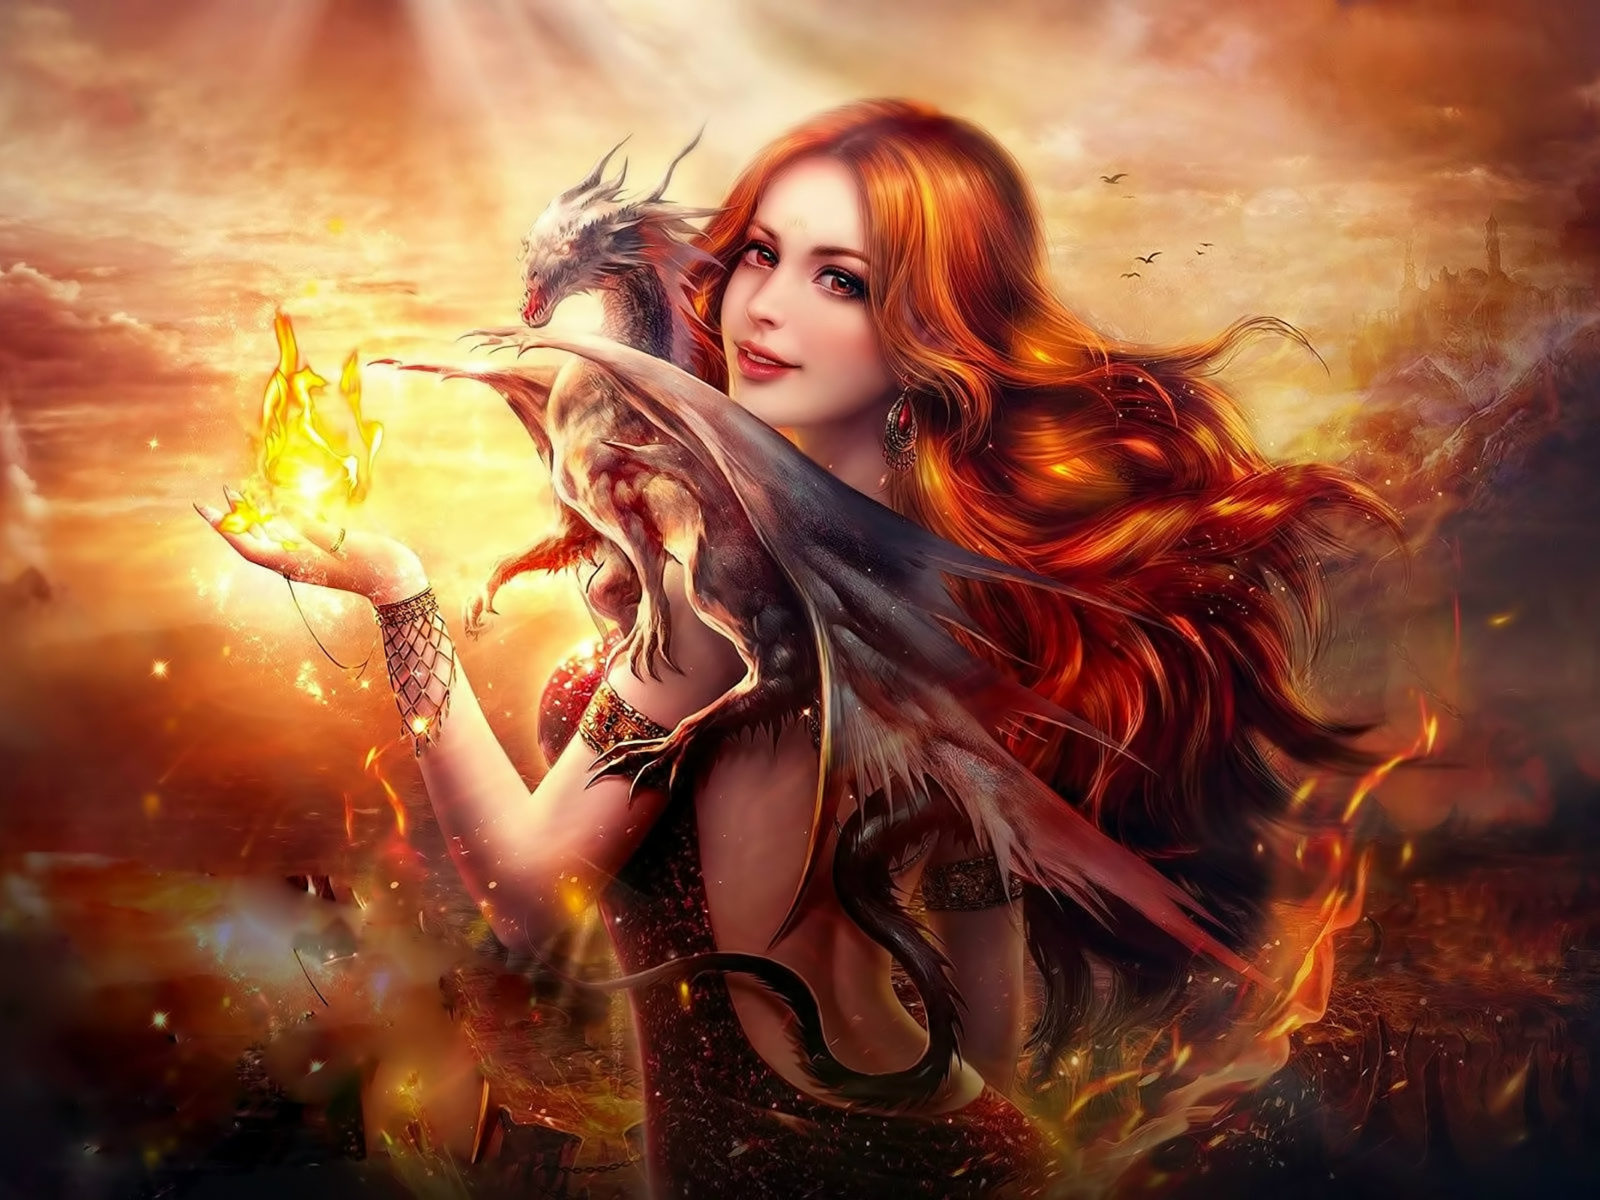 Girl with red hair and dragon fire monster of mythology fantasy art wallpaper, Wallpaper13.com